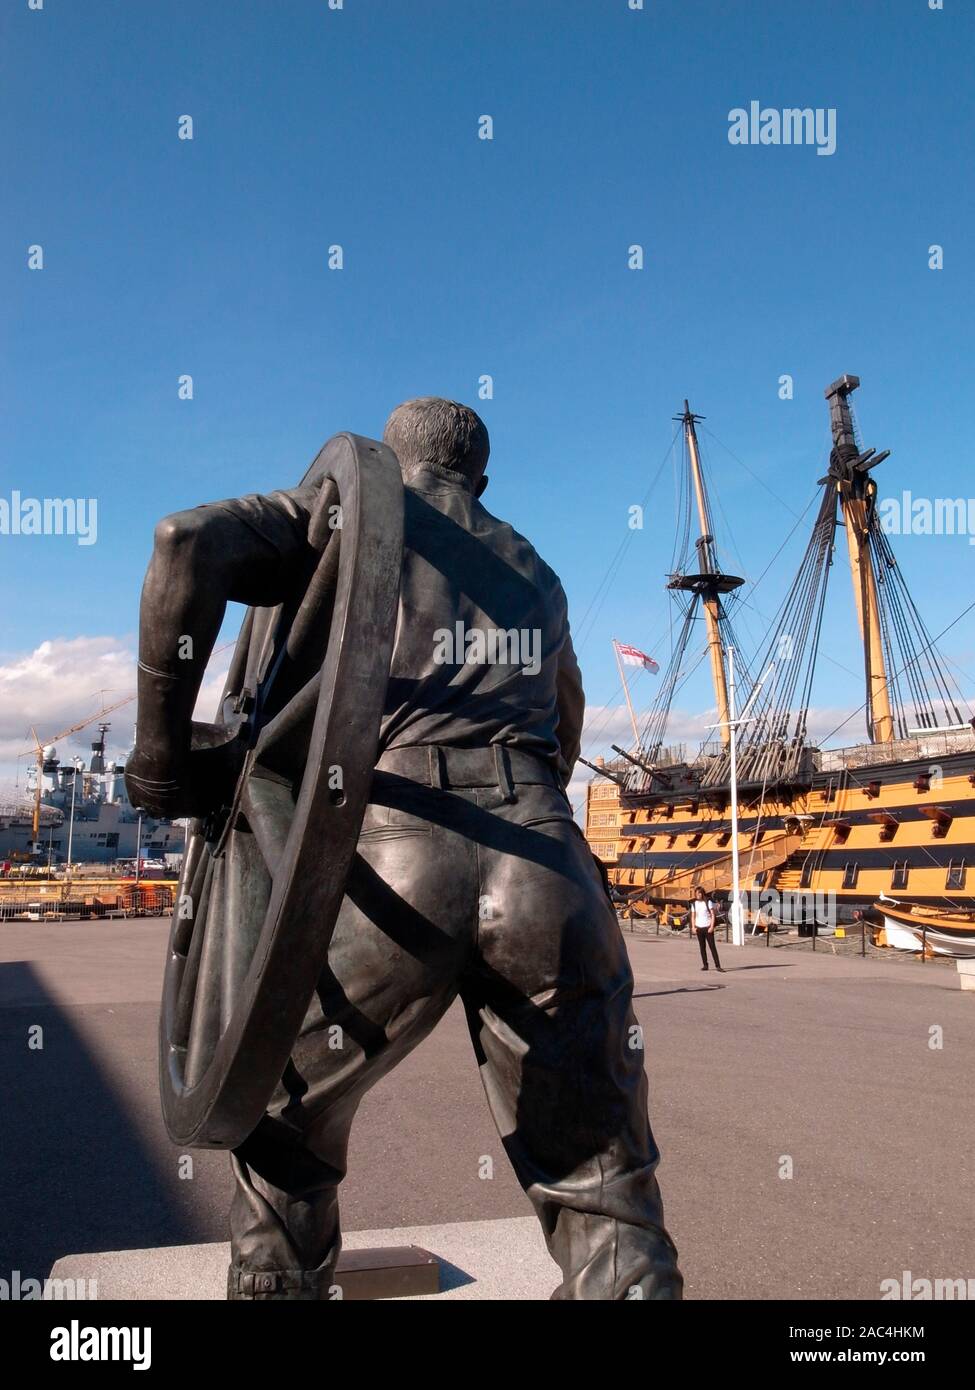 AJAXNETPHOTO. PORTSMOUTH, ENGLAND. - HISTORIC DOCKYARD BRONZE STATUE  - A FIELD GUNNER DEPICTED HEFTING A FIELD GUN WHEEL BY BRITISH SCULPTOR CHRISTOPHER KELLY. THE STATUE ON A PLINTH COMMEMORATES MEN FROM PORTSMOUTH COMMAND IN THE ANNUAL FIELD GUN COMPETITION AT THE ROYAL TOURNAMENT AND WHO TRAINED AT ROYAL NAVAL BARRACKS FROM 1947-1999 WHEN THE TOURNAMENT ENDED. TO THE LIMIT AND BEYOND. NELSON'S 1805 BATTLE OF TRAFALGAR FLAGSHIP HMS VICTORY IS SEEN BACKGROUND. PHOTO:JONATHAN EASTLAND/AJAX REF:GR110111 3169 Stock Photo